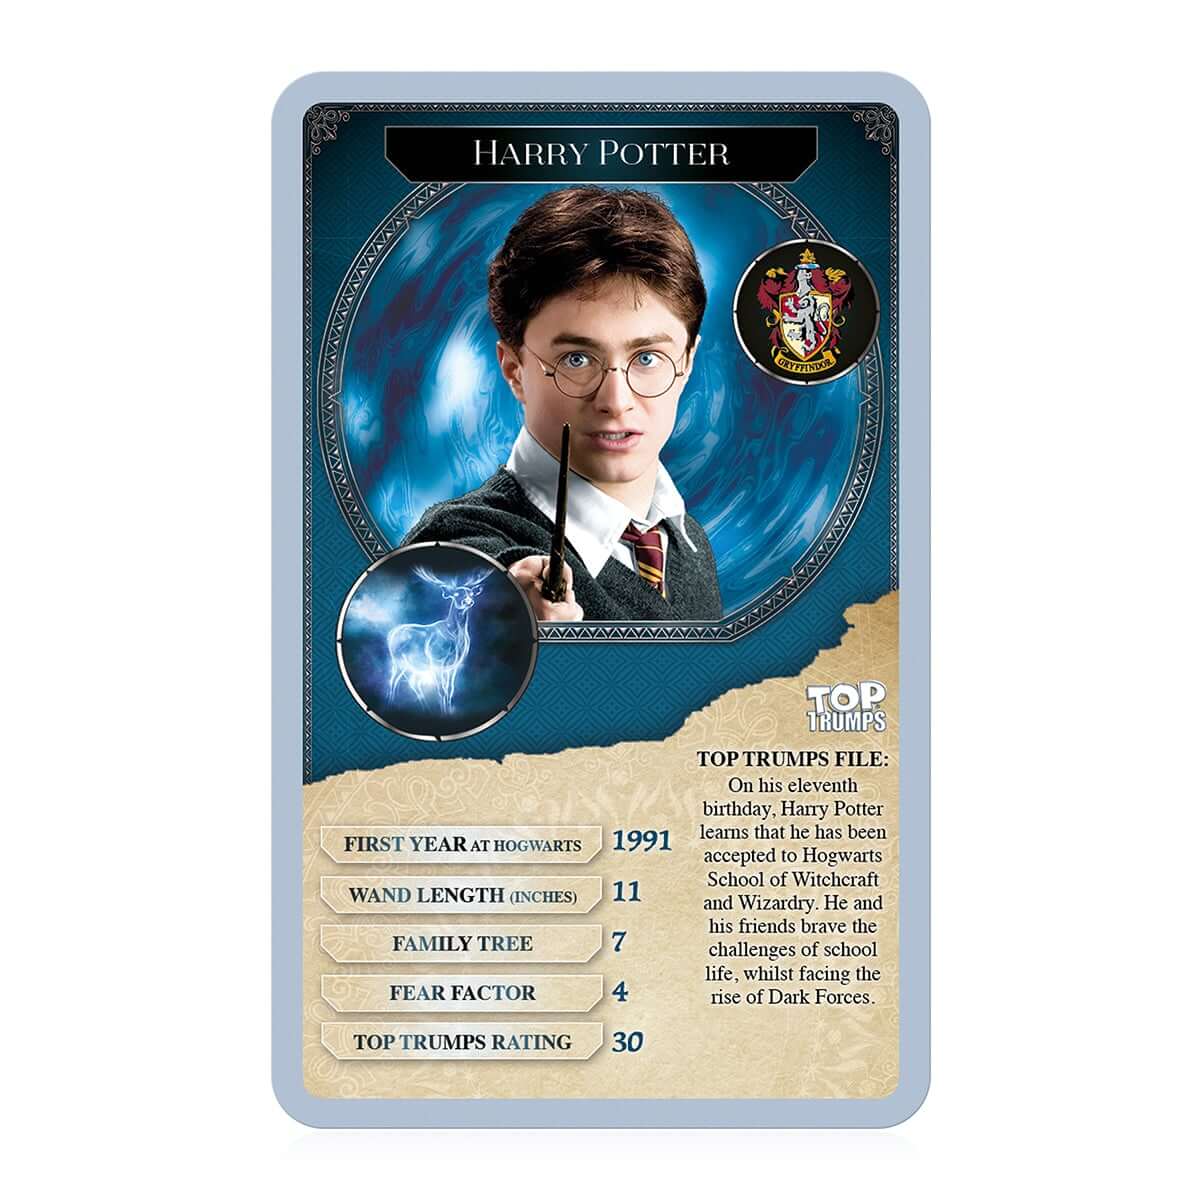 Potter - 30 Witches & Wizards Top Trumps